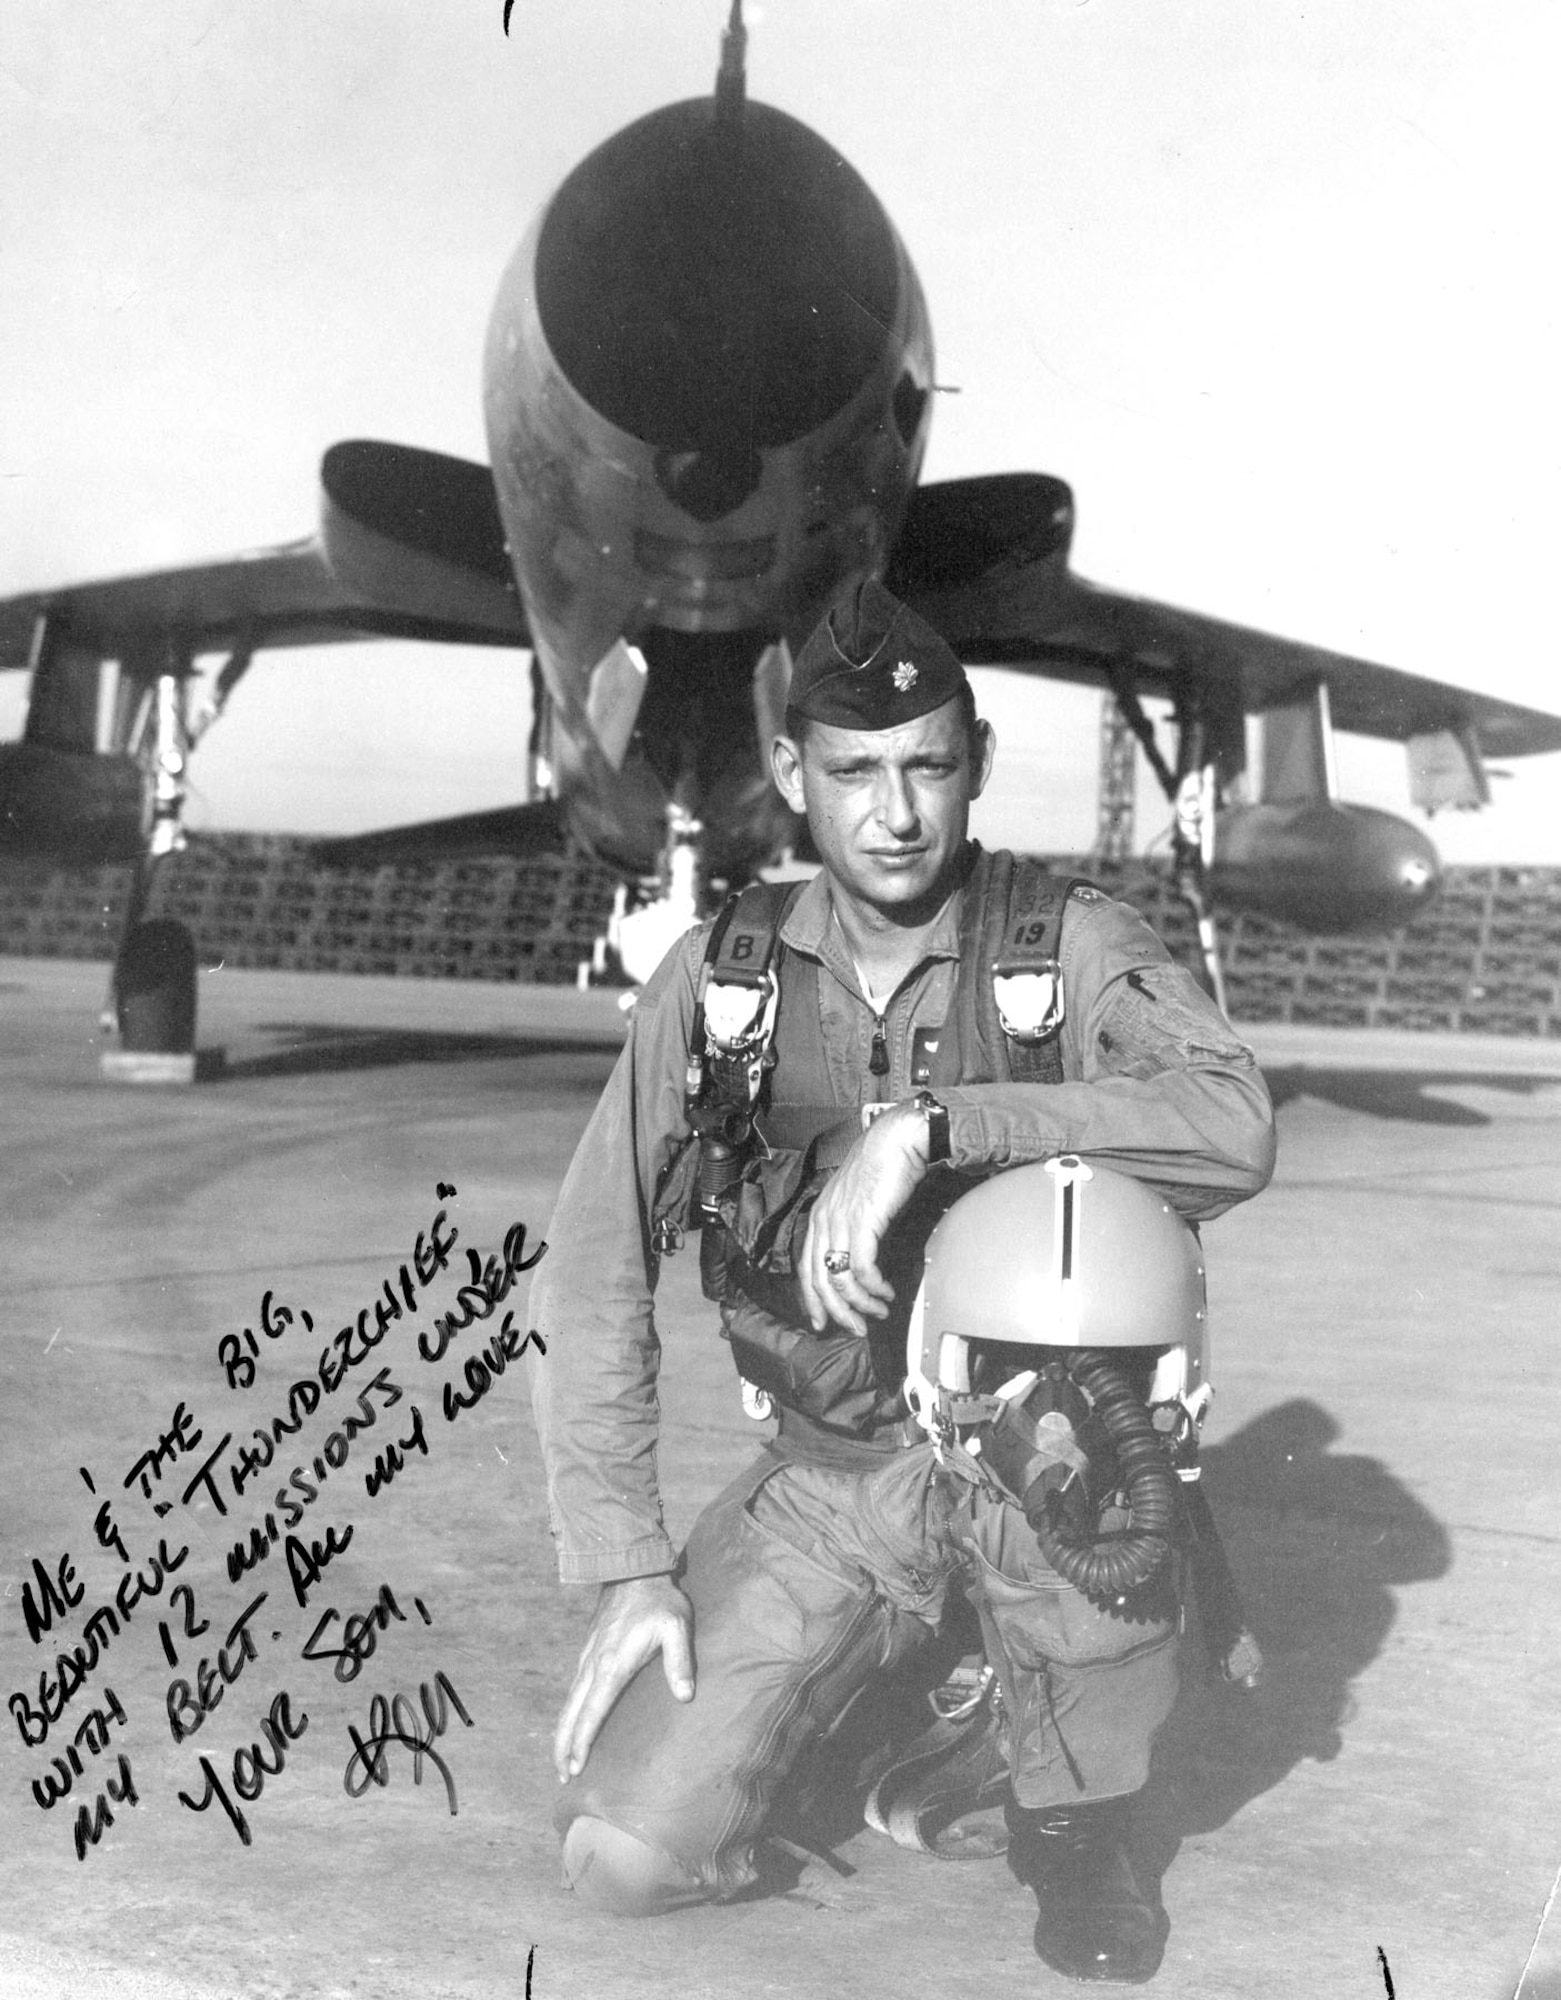 Ken Bell standing in front of an F-105. (U.S. Air Force photo)